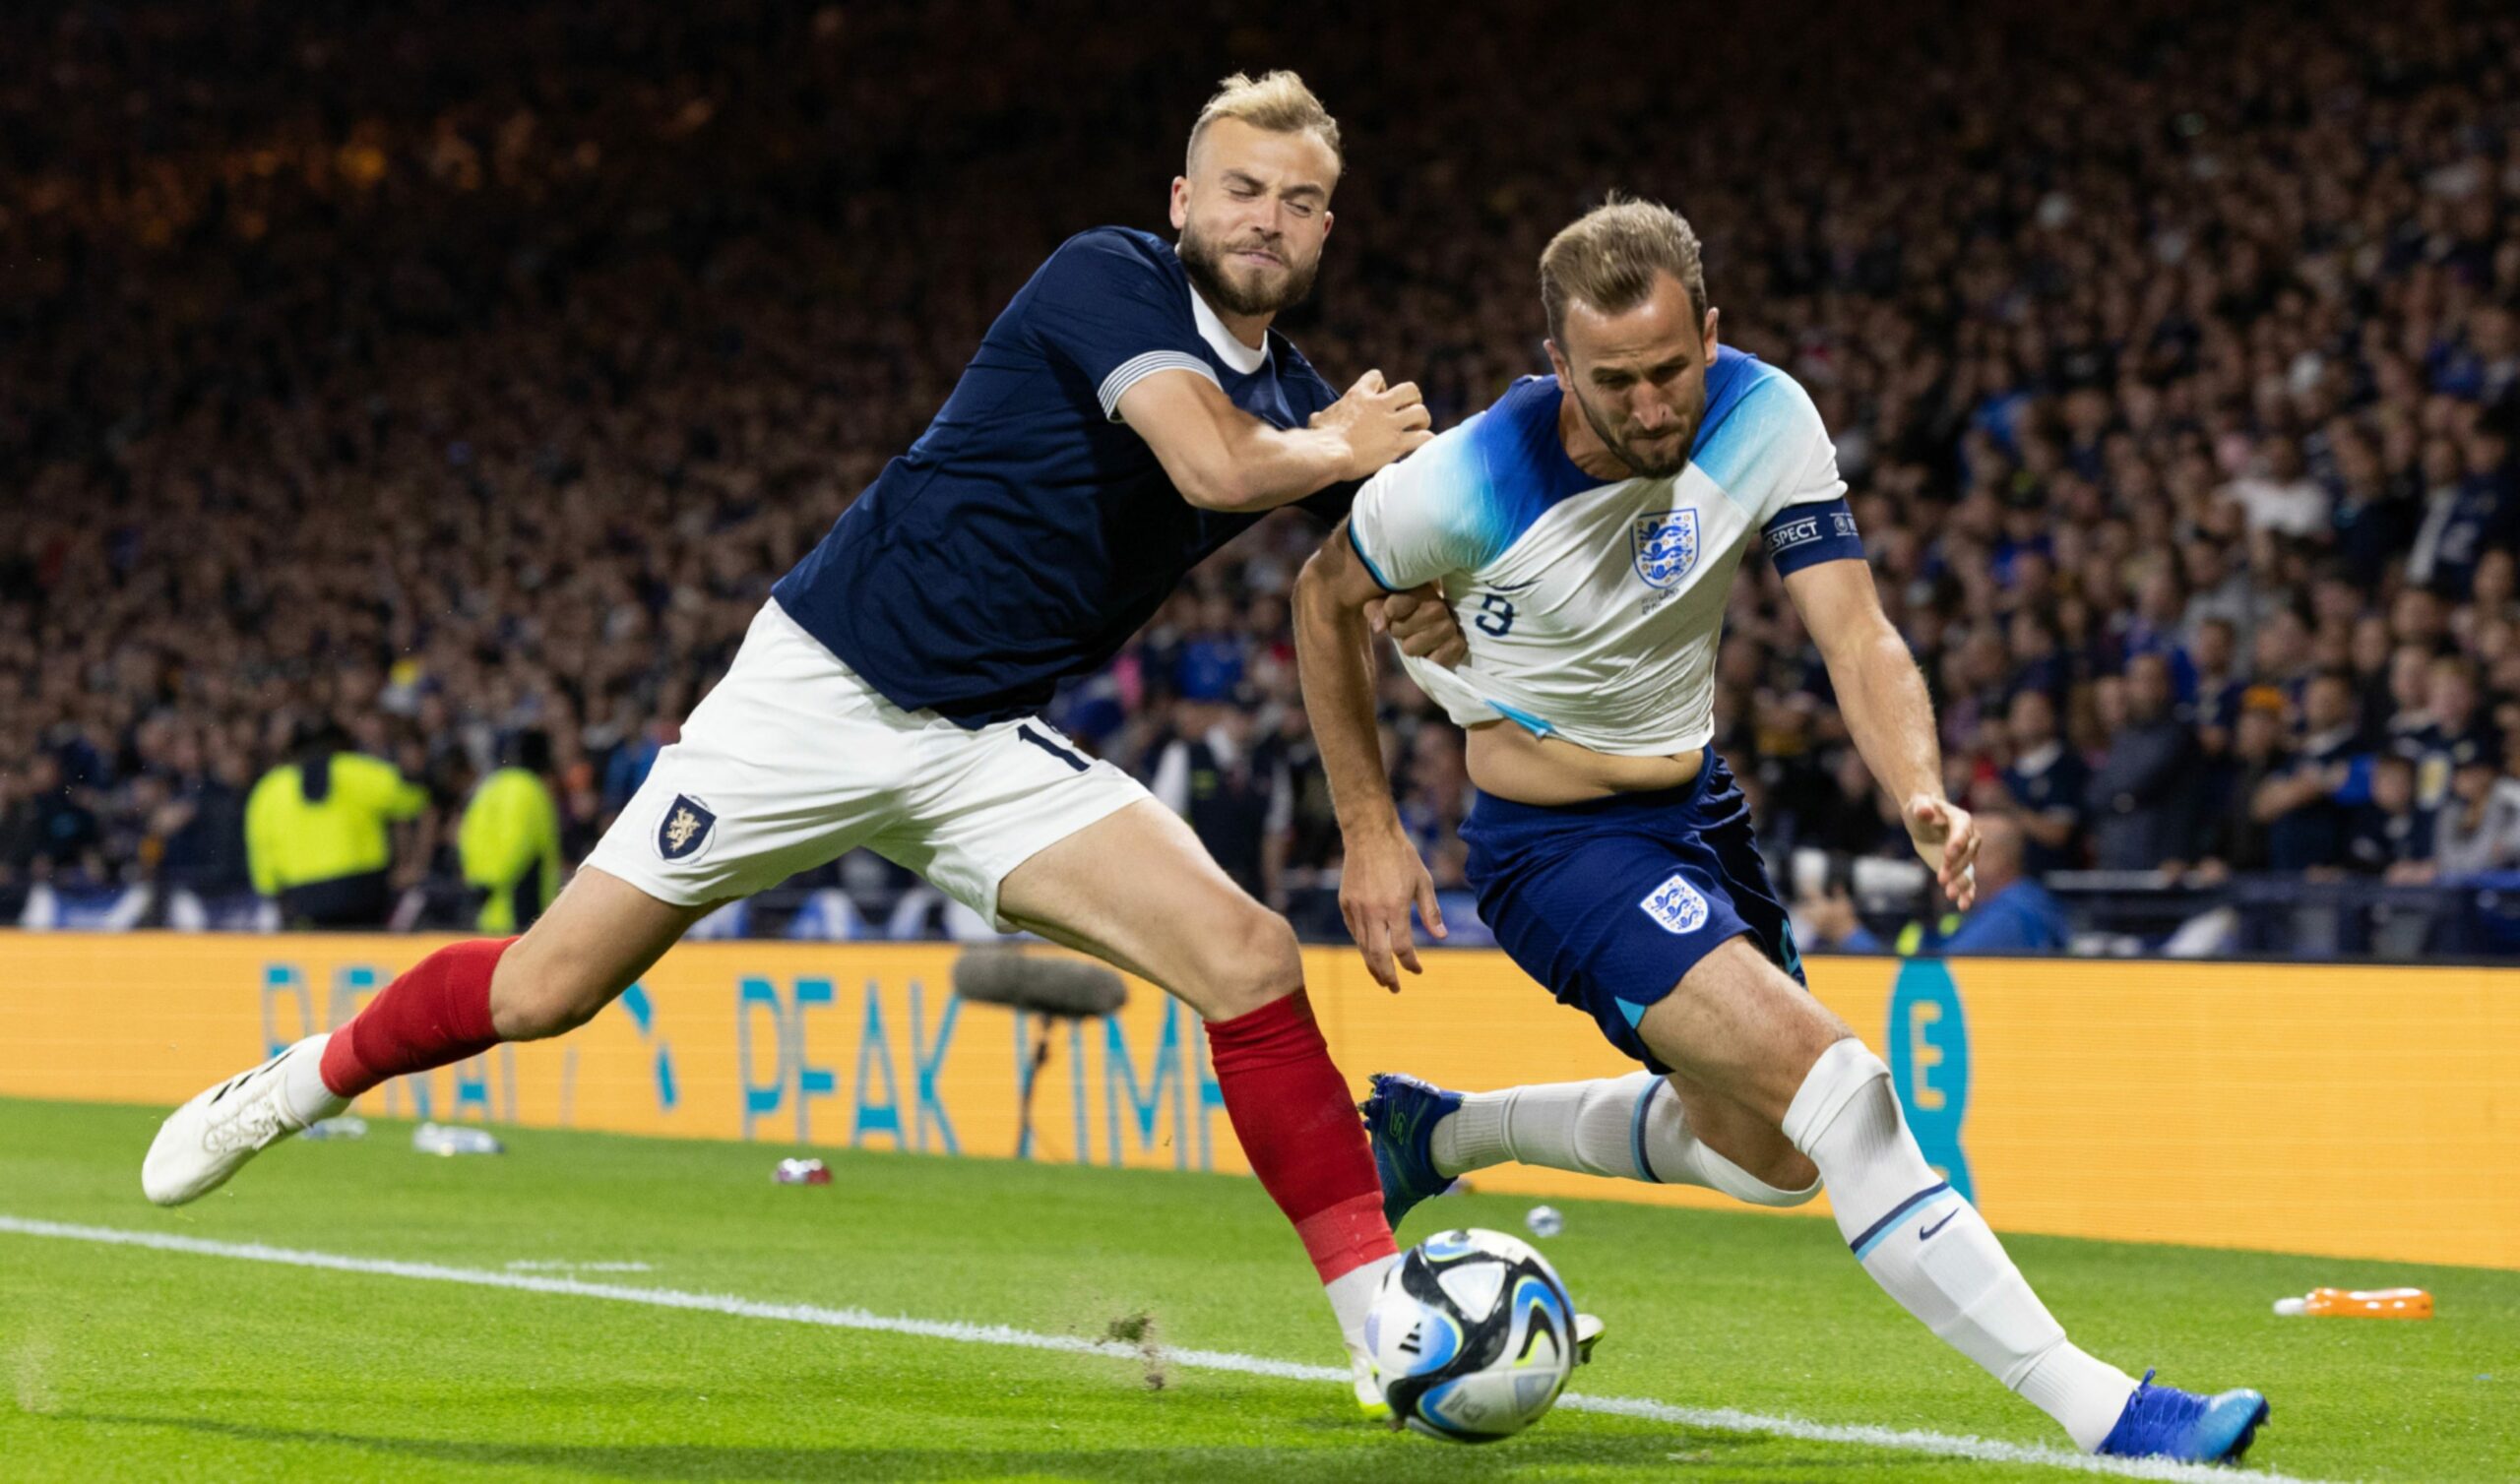 Scotland's Ryan Porteous and England's Harry Kane in action during the 150th Anniversary Heritage Match